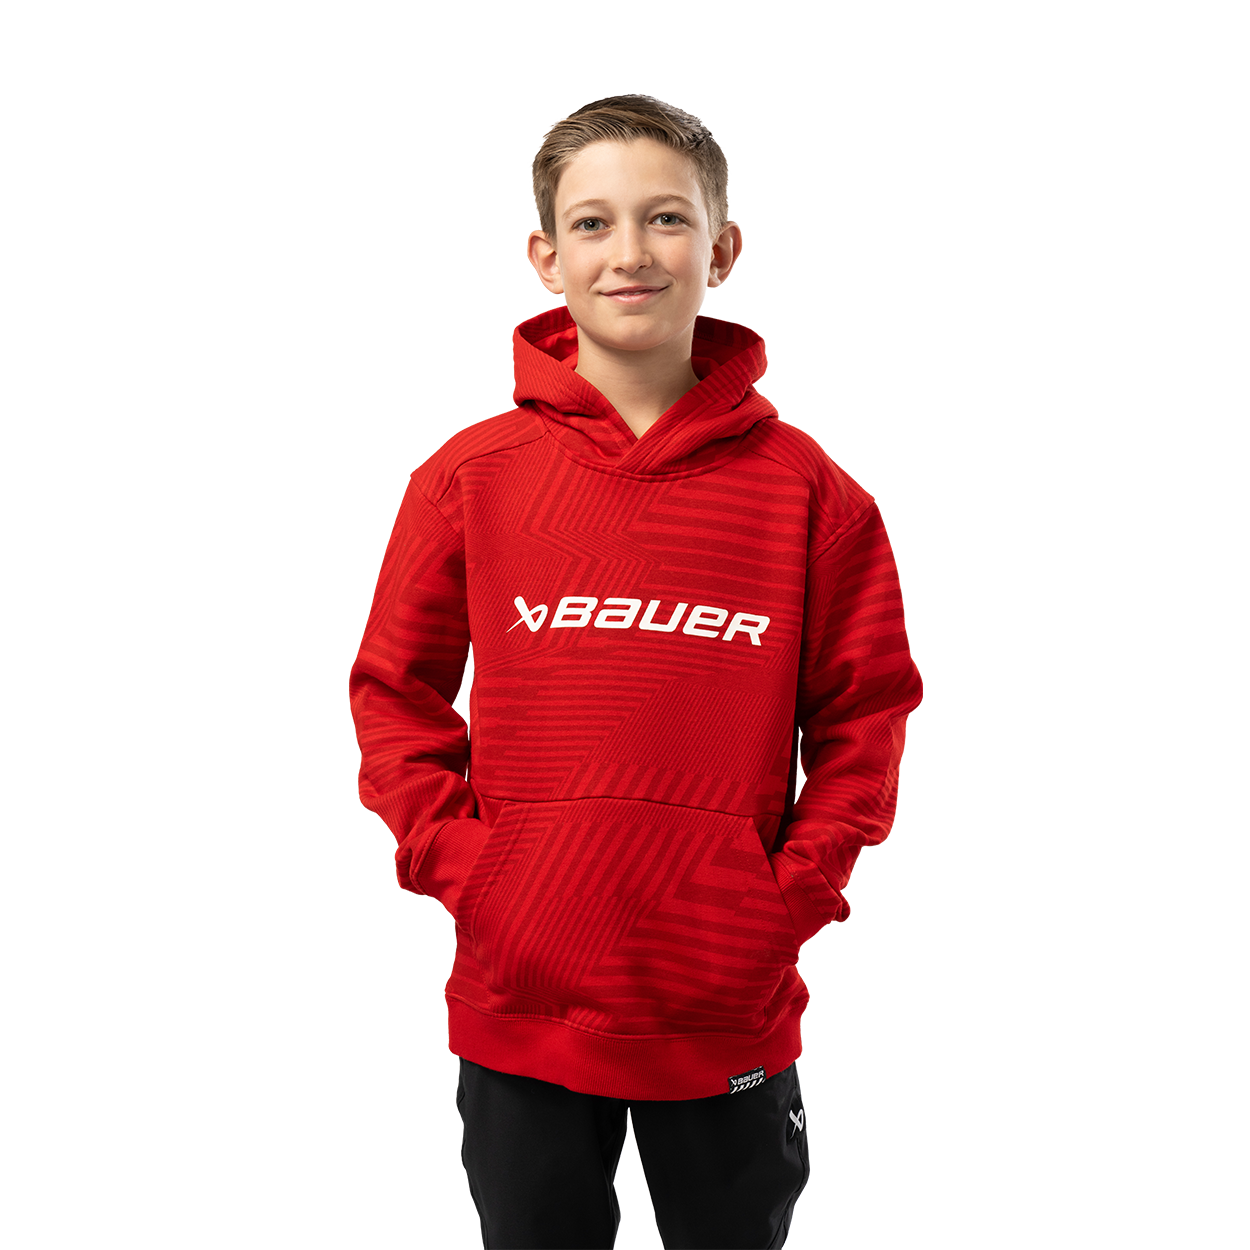 BAUER GRAPHIC STRIPE HOODIE YOUTH